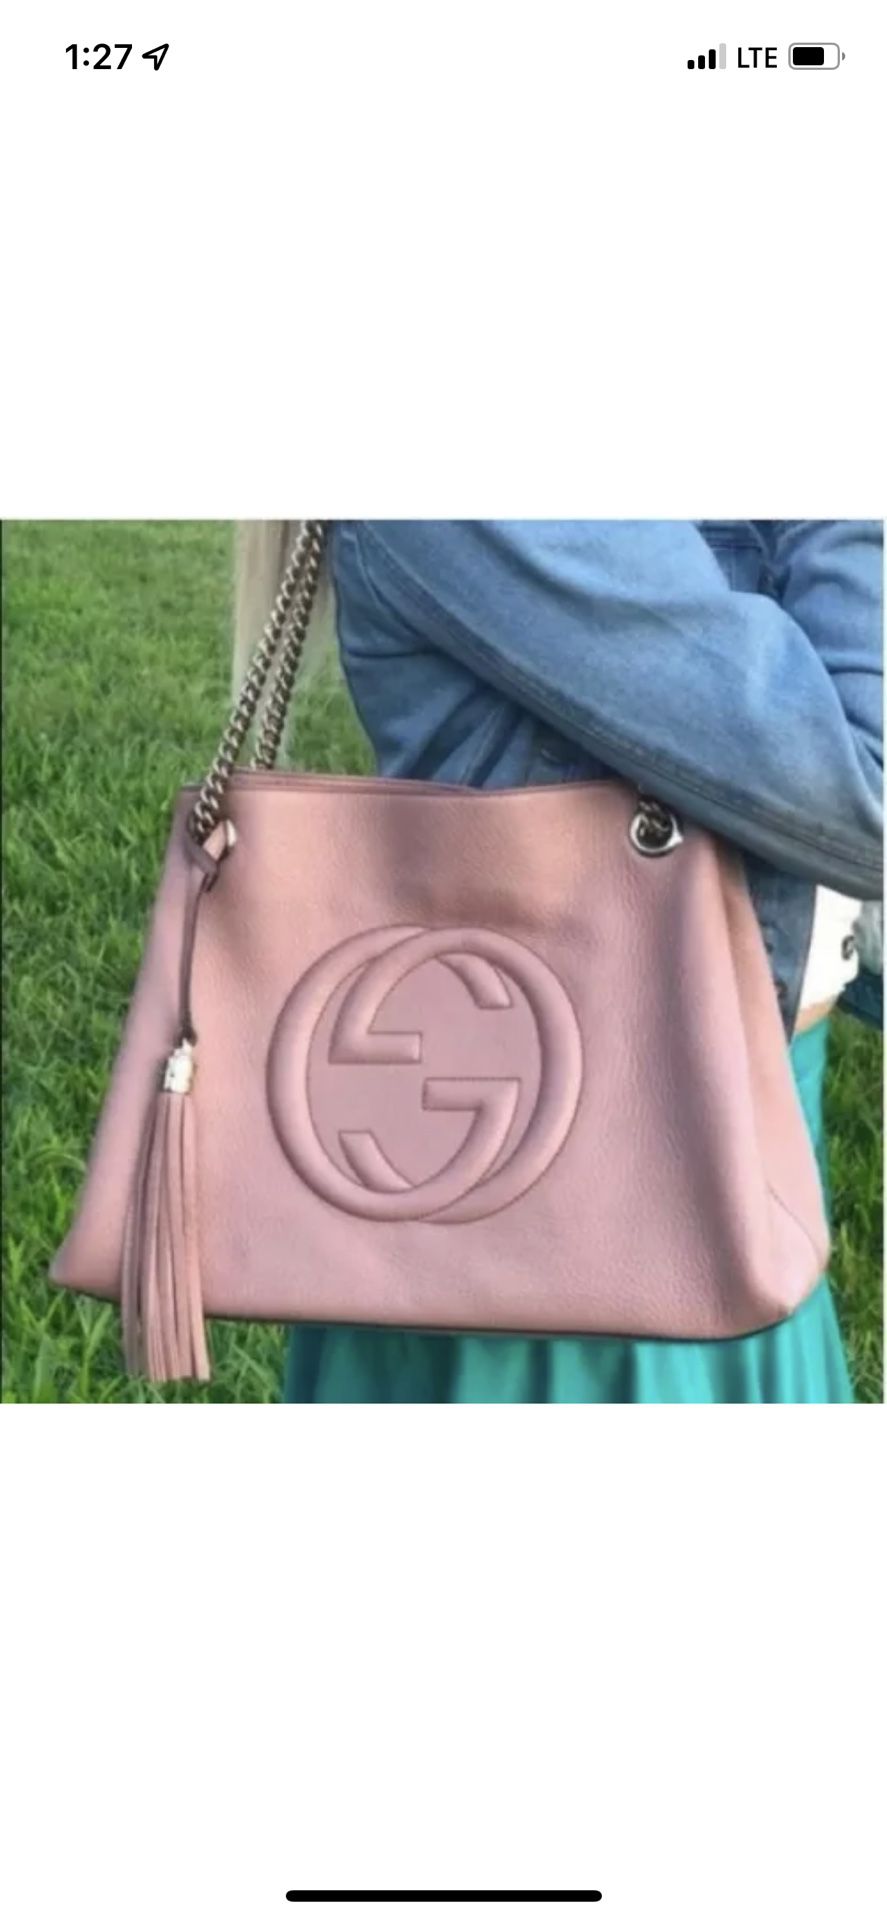 RARE Gucci Soho Blush Pink Medium Tote with Chain AUTHENTIC